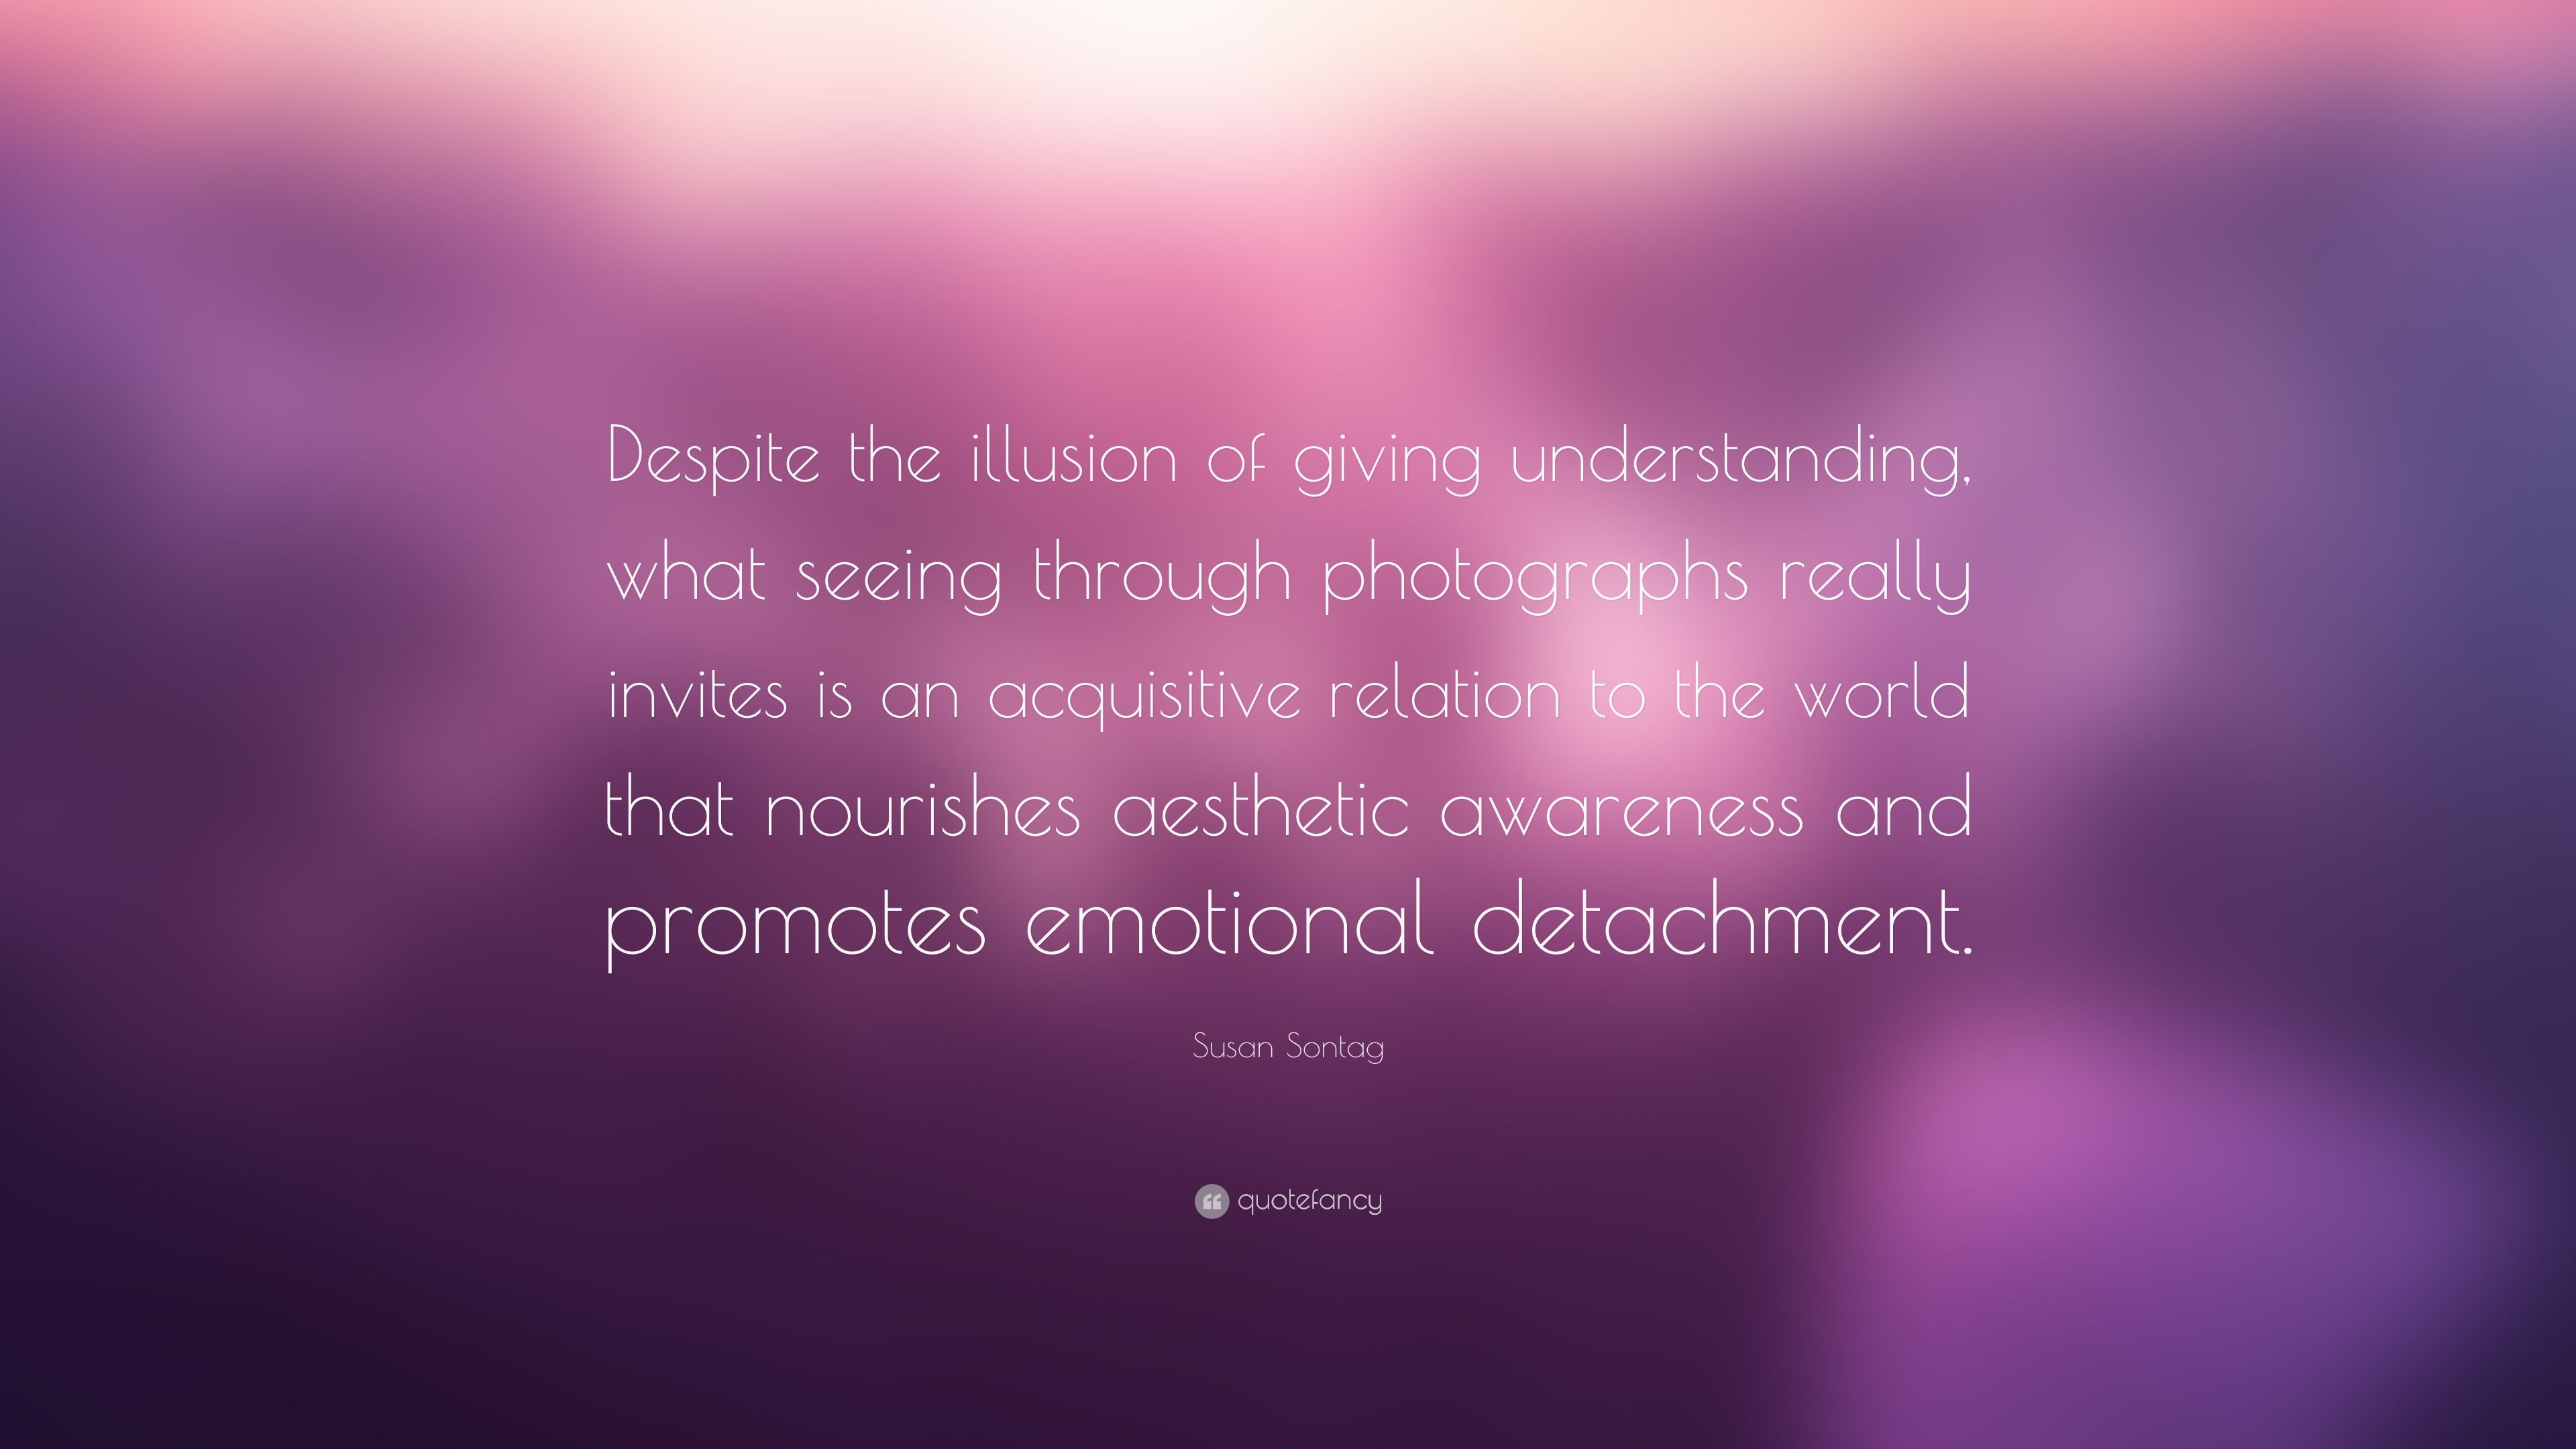 Susan Sontag Quote: “Despite the illusion of giving understanding